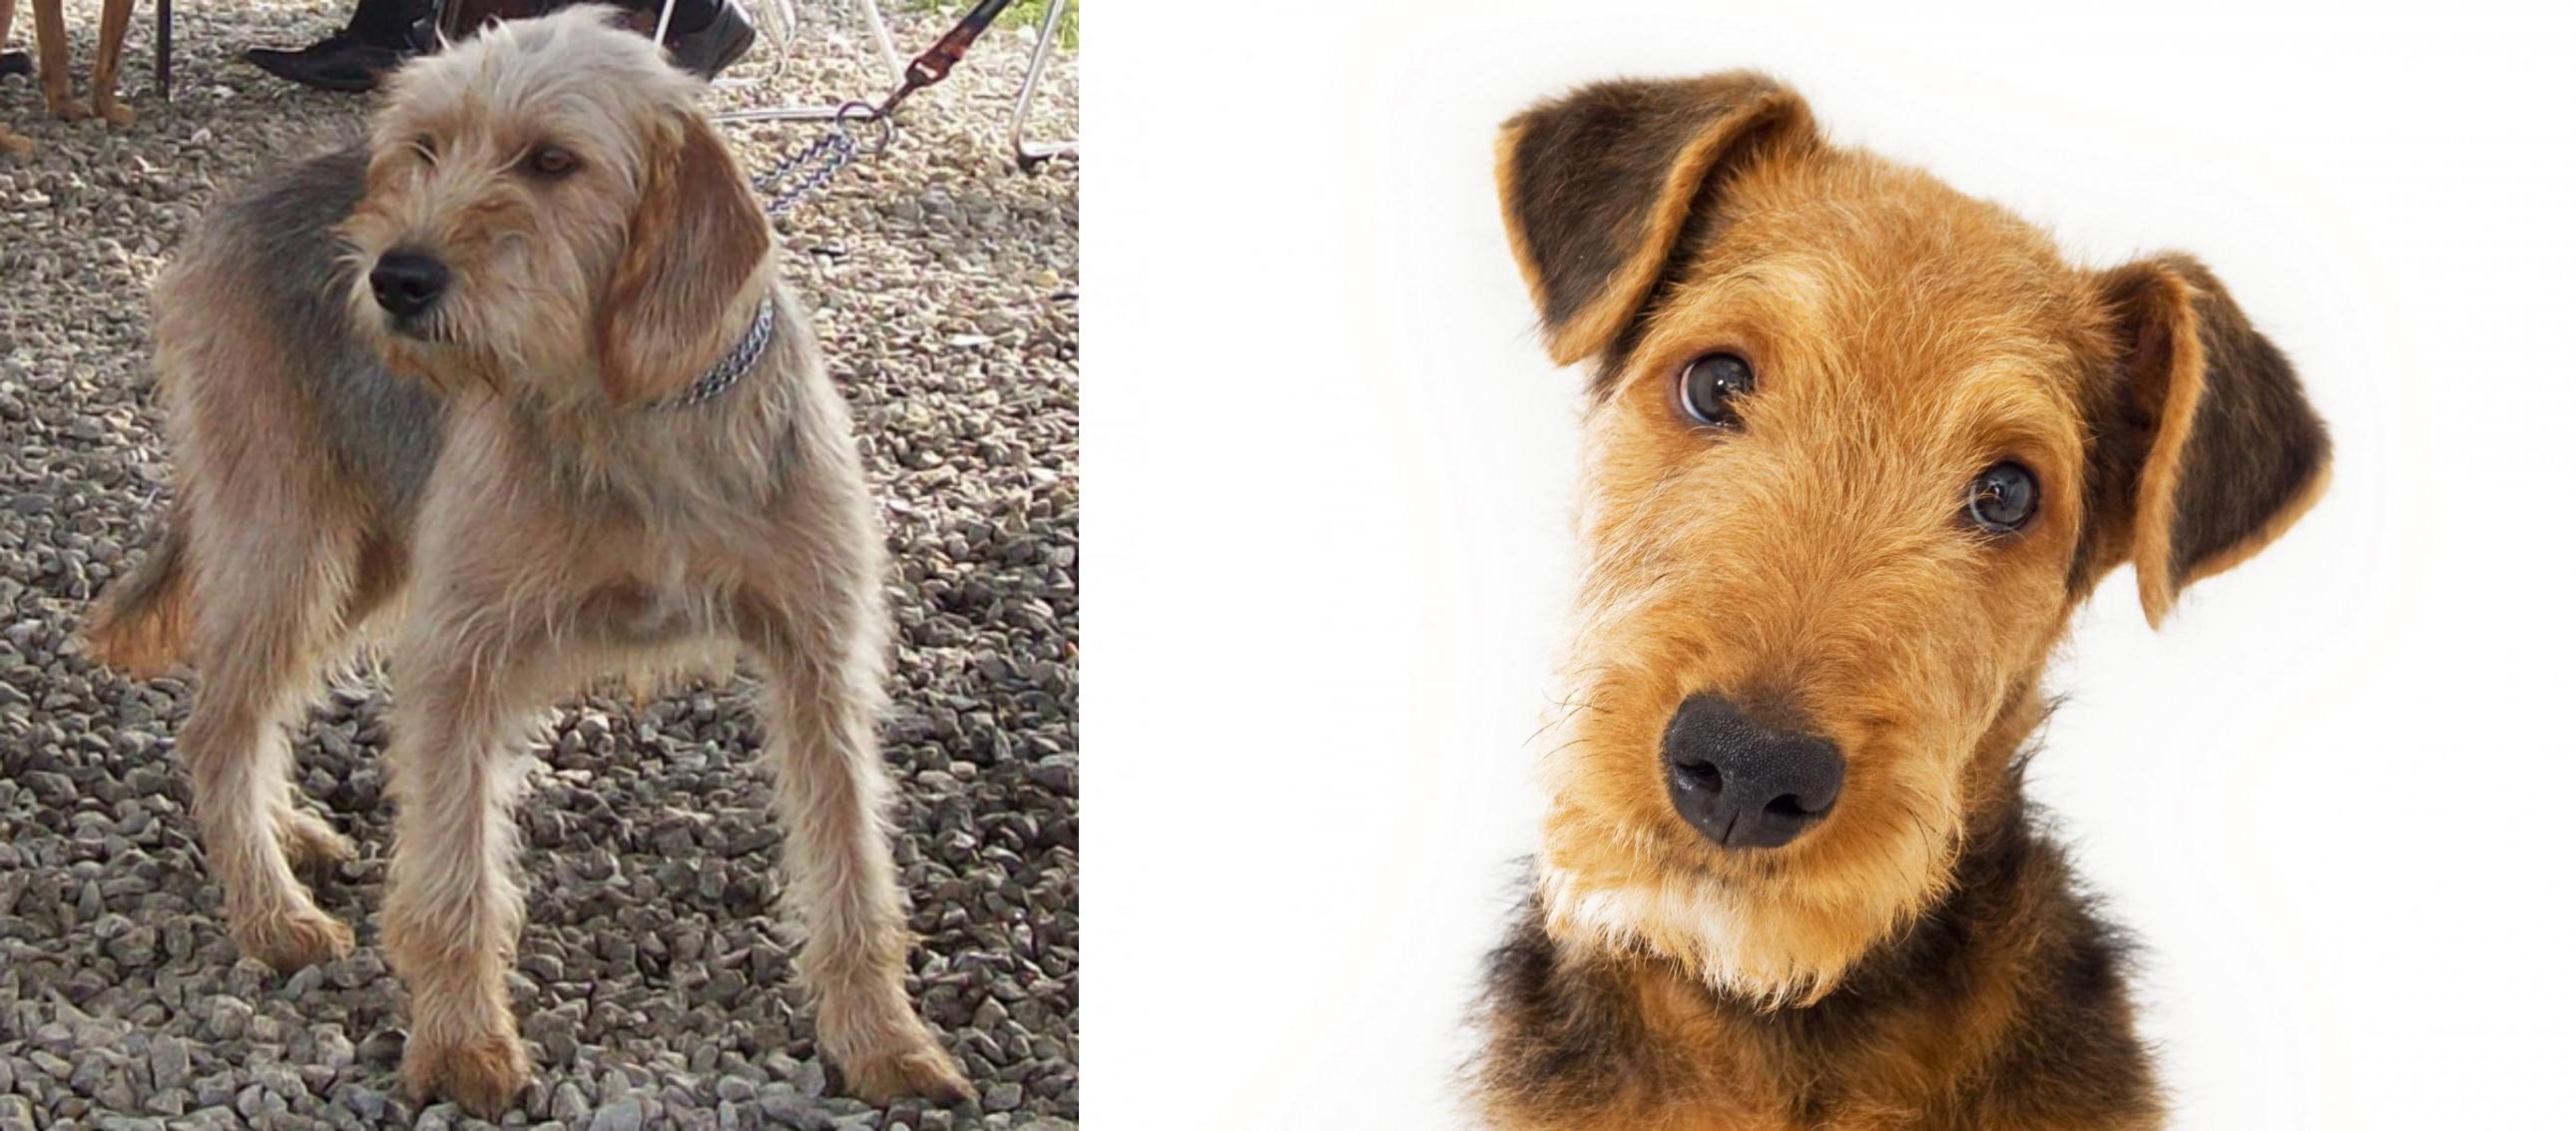 Bosnian Coarse Haired Hound Vs Airedale Terrier Breed Comparison